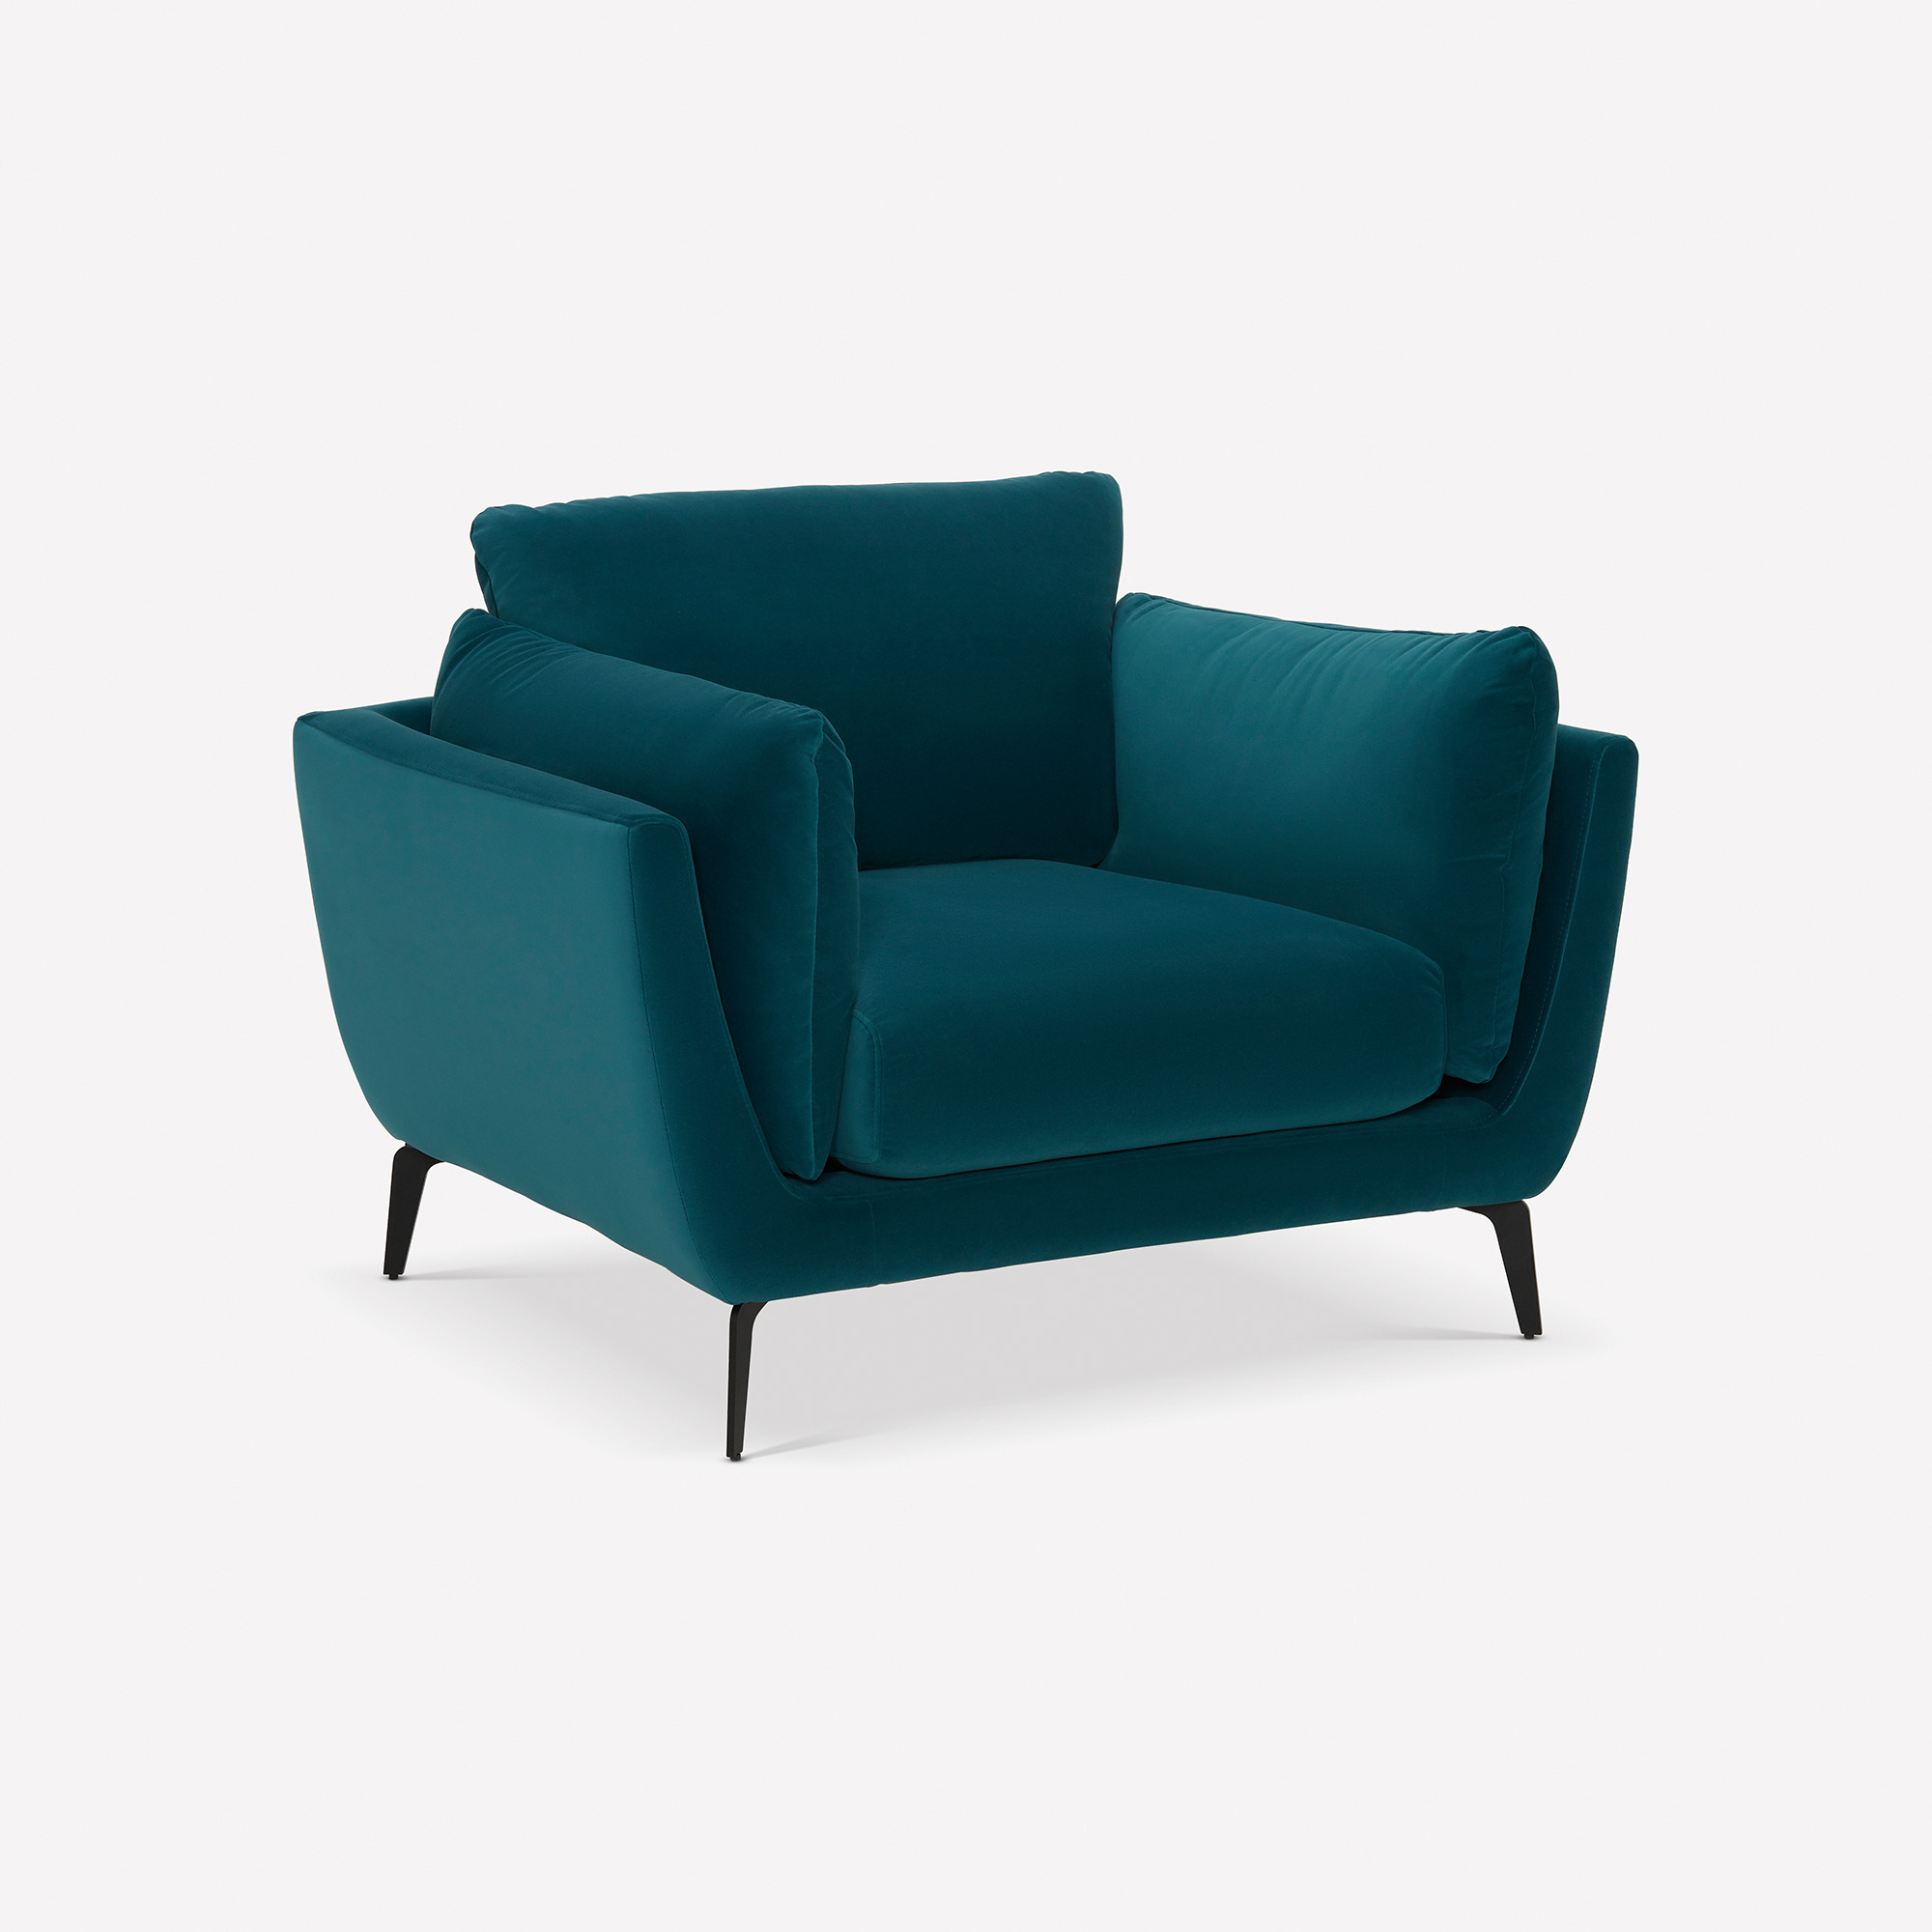 Boone Armchair, Teal Fabric - Barker & Stonehouse - image 1